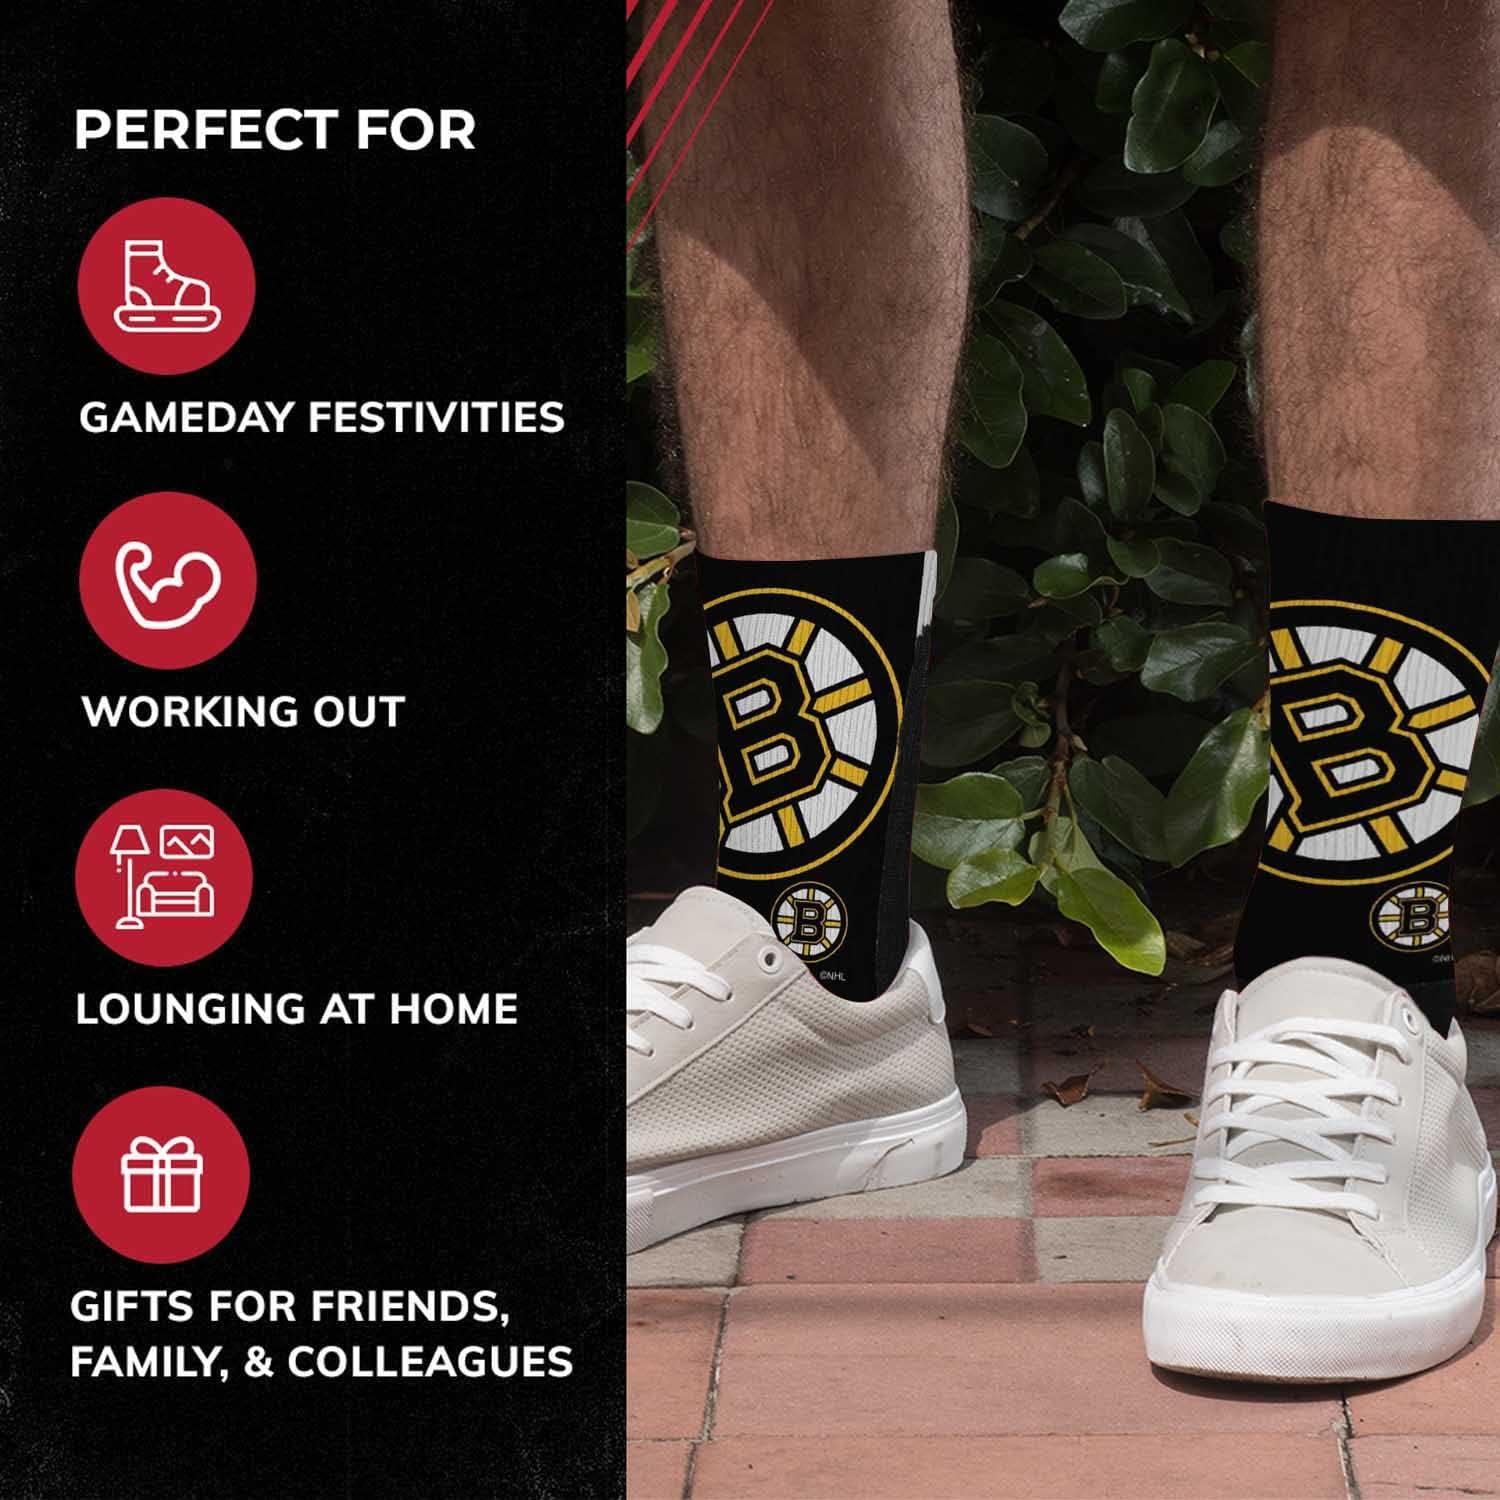 Youth NHL Zoom Curve Team Crew Socks, for Boys and Girls, Game Day Apparel  Boston Bruins - Black